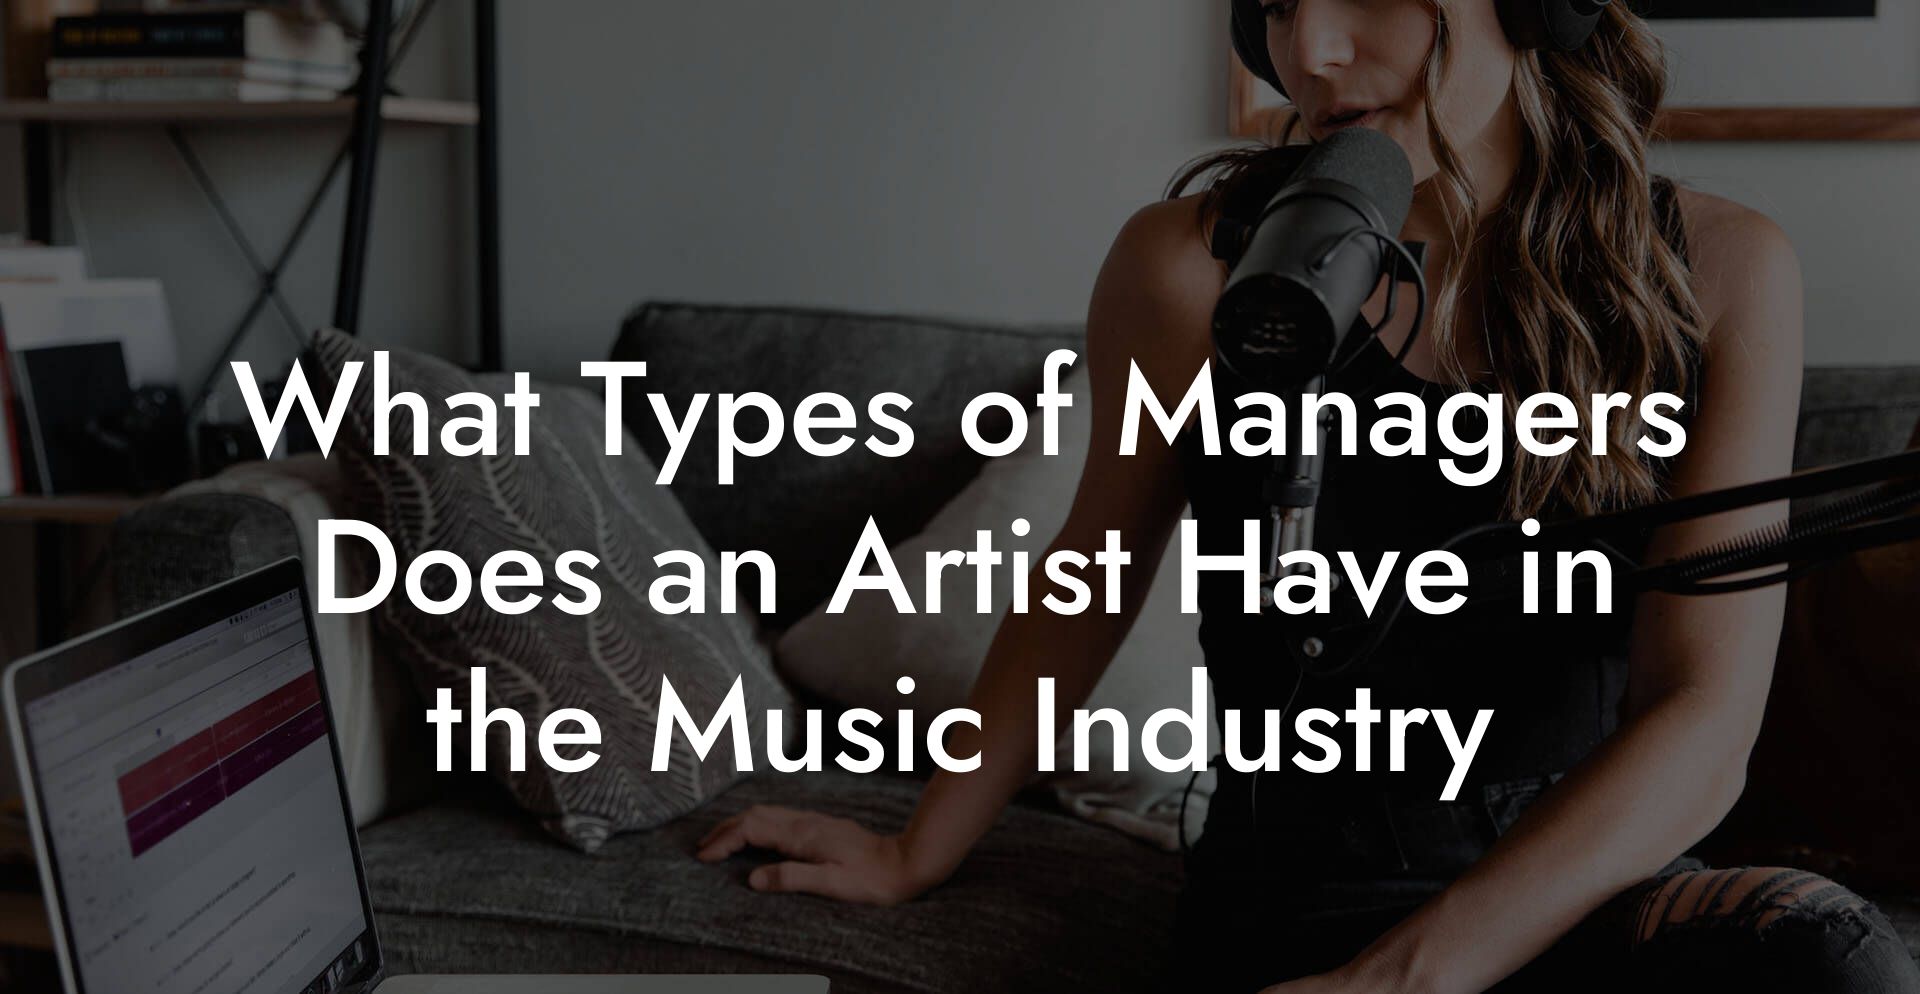 What Types of Managers Does an Artist Have in the Music Industry